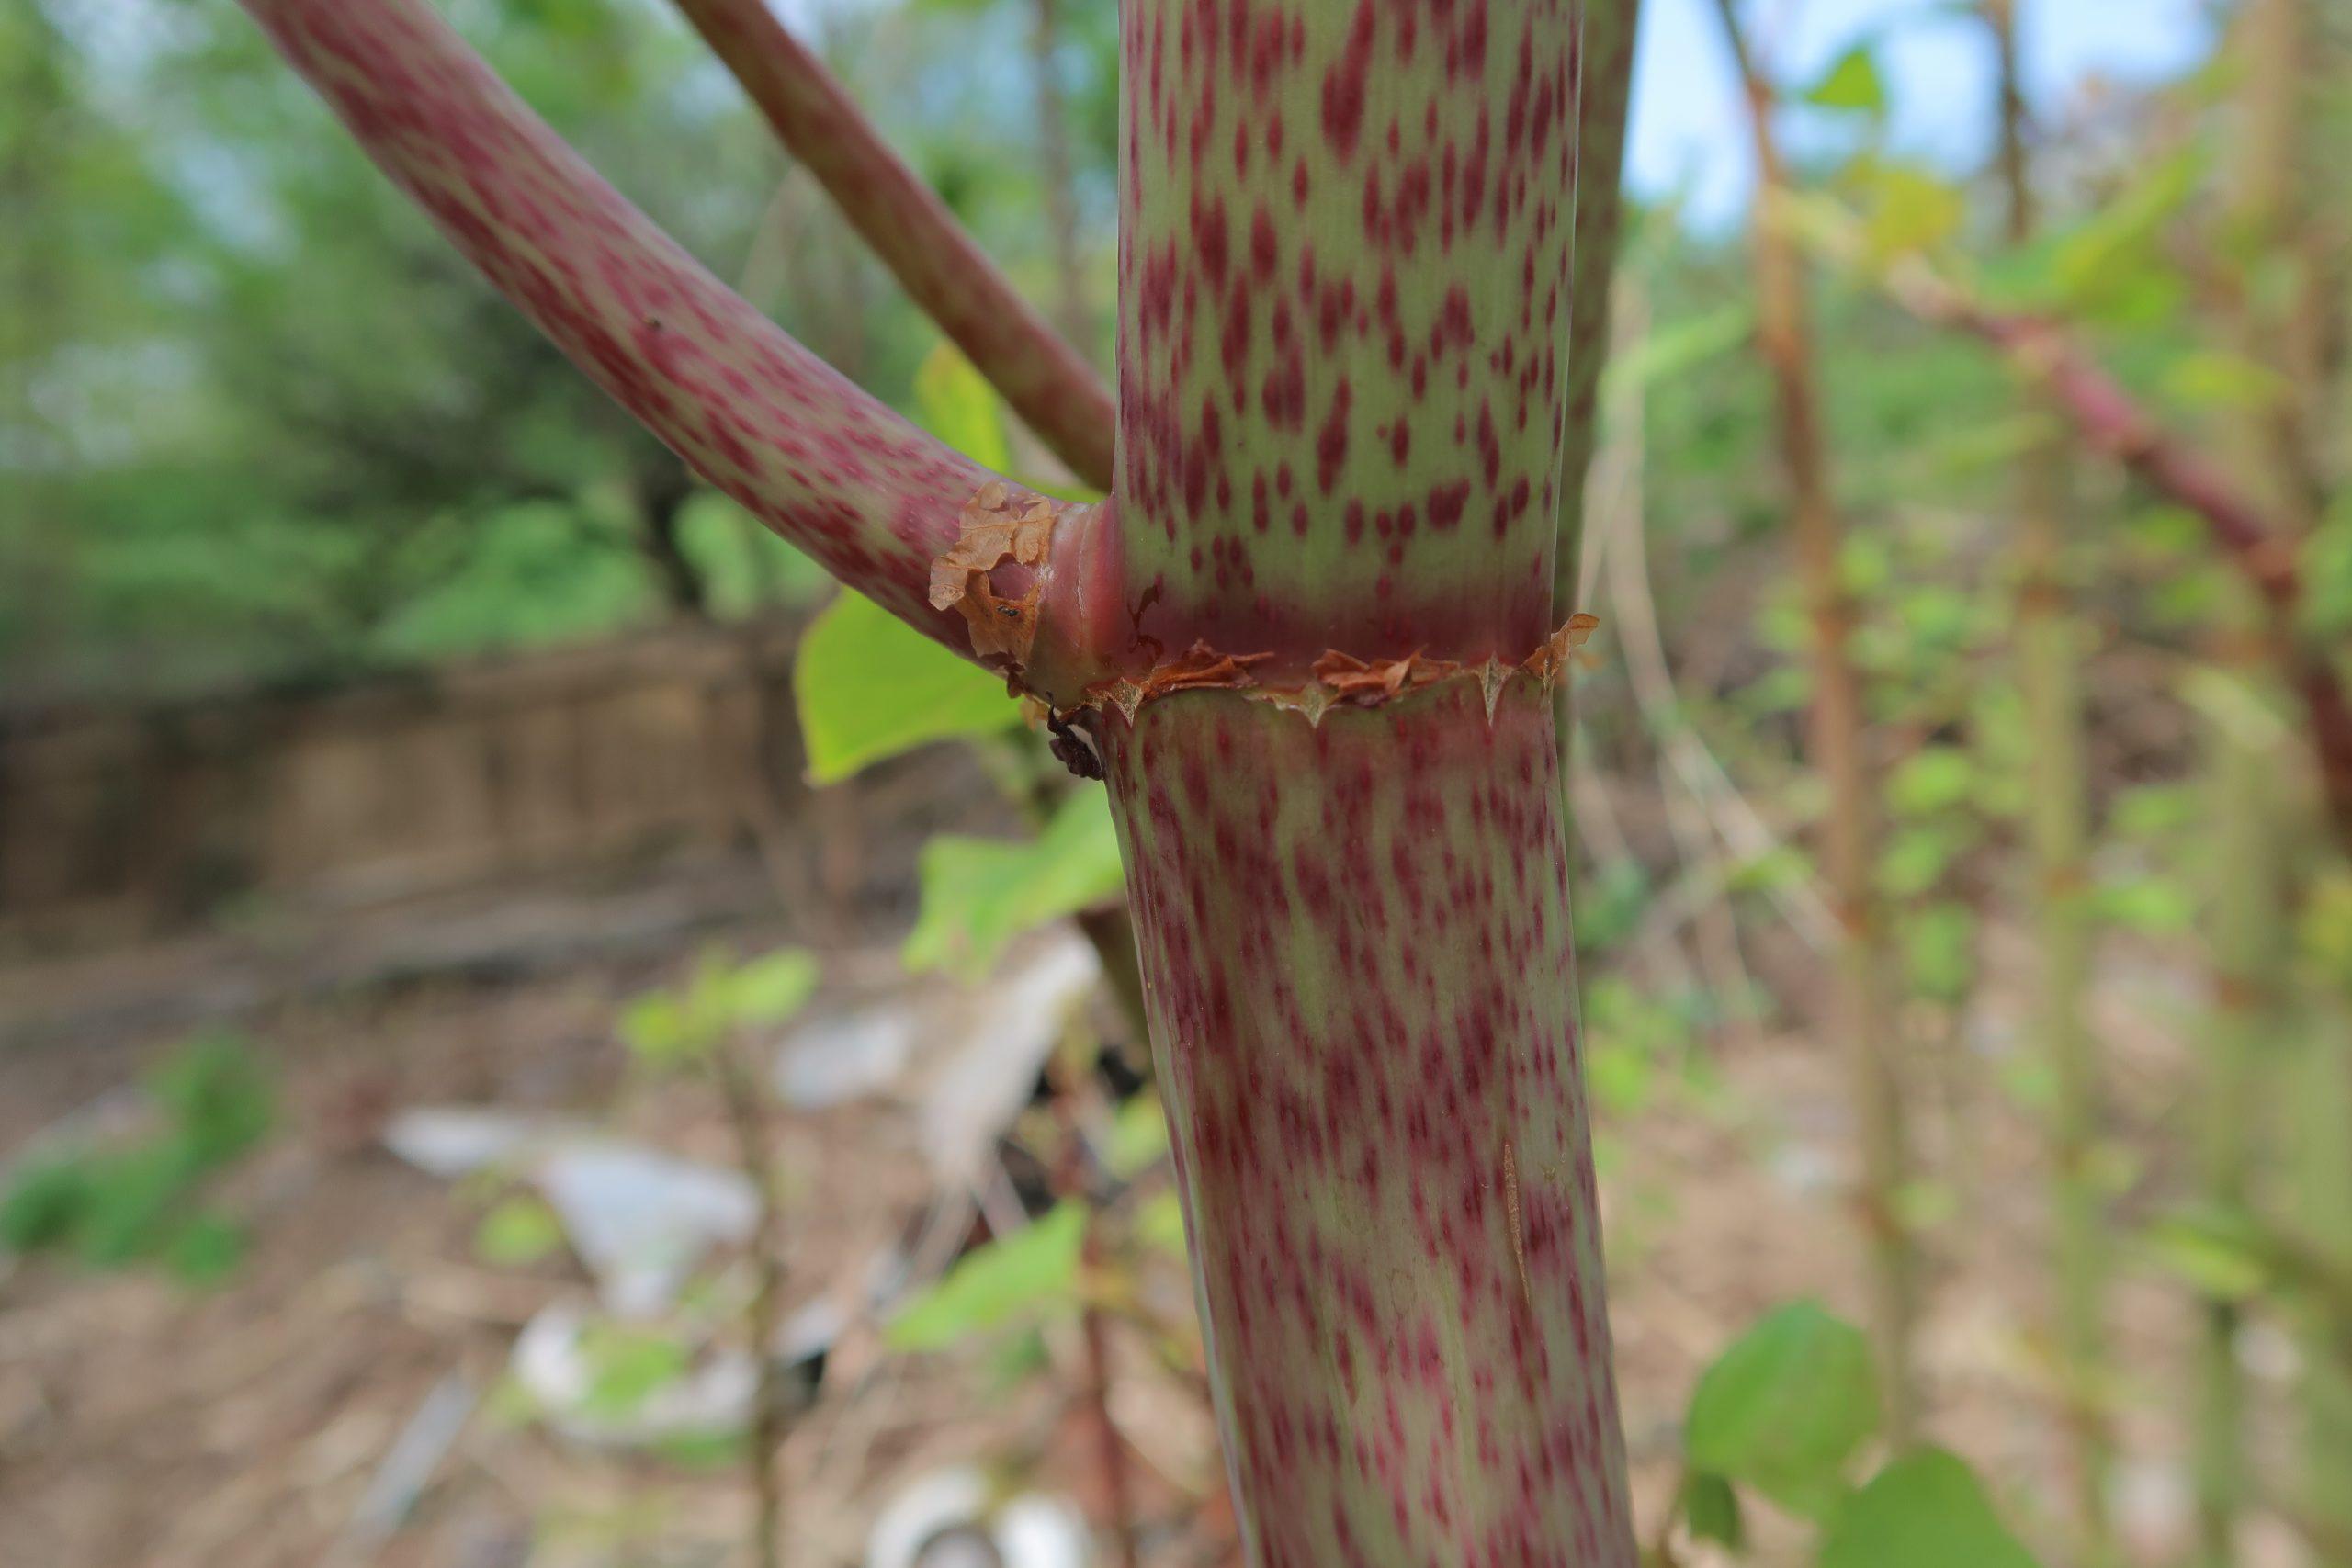 Japanese knotweed stems grow to over 3 metres in as little as six weeks - commercial knotweed removal